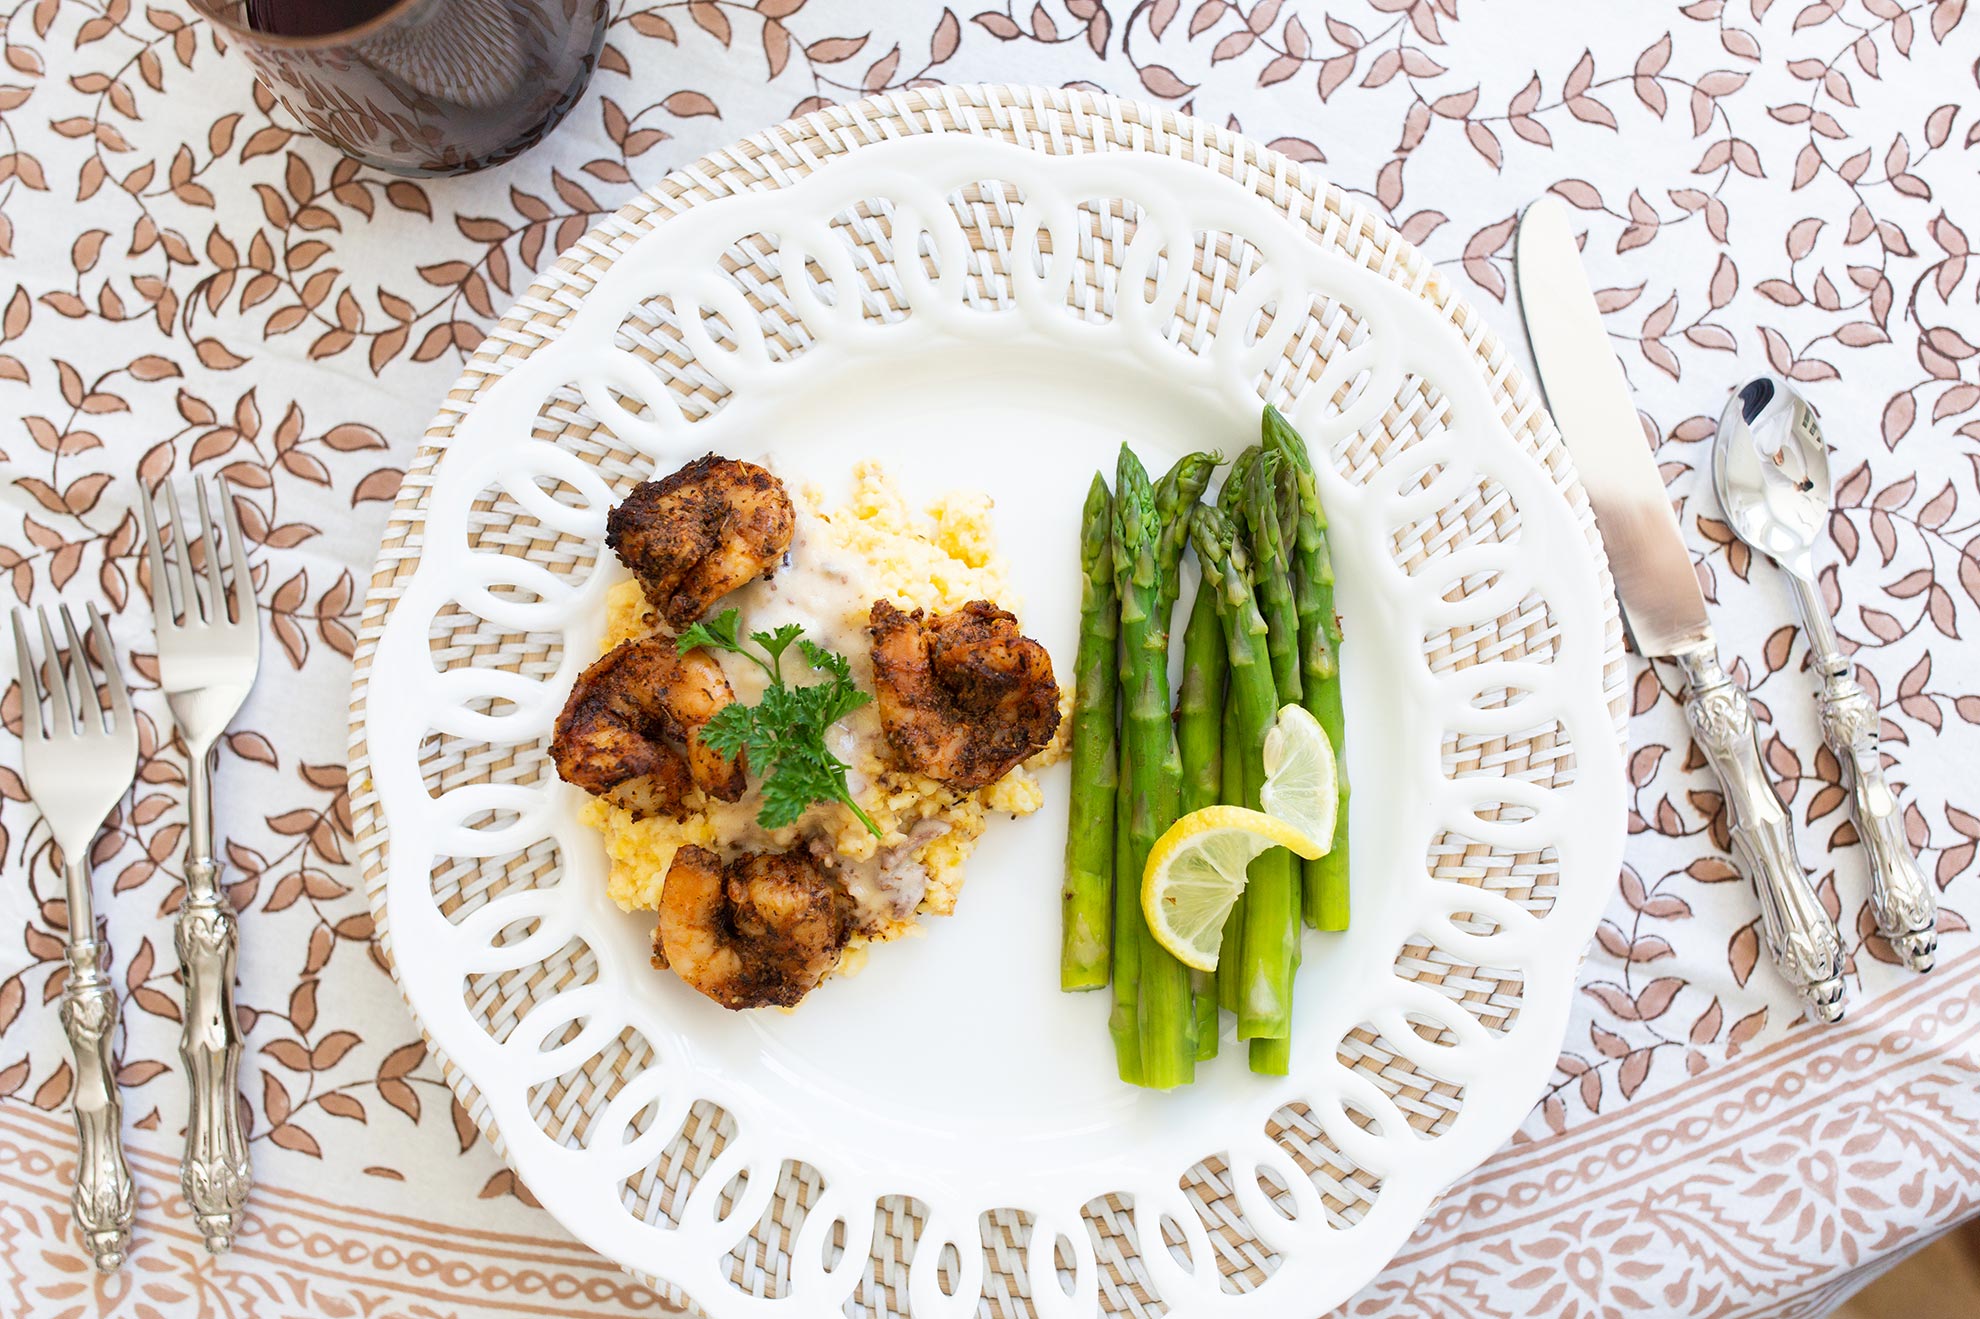 Shrimp and Grits with Southern Gravy